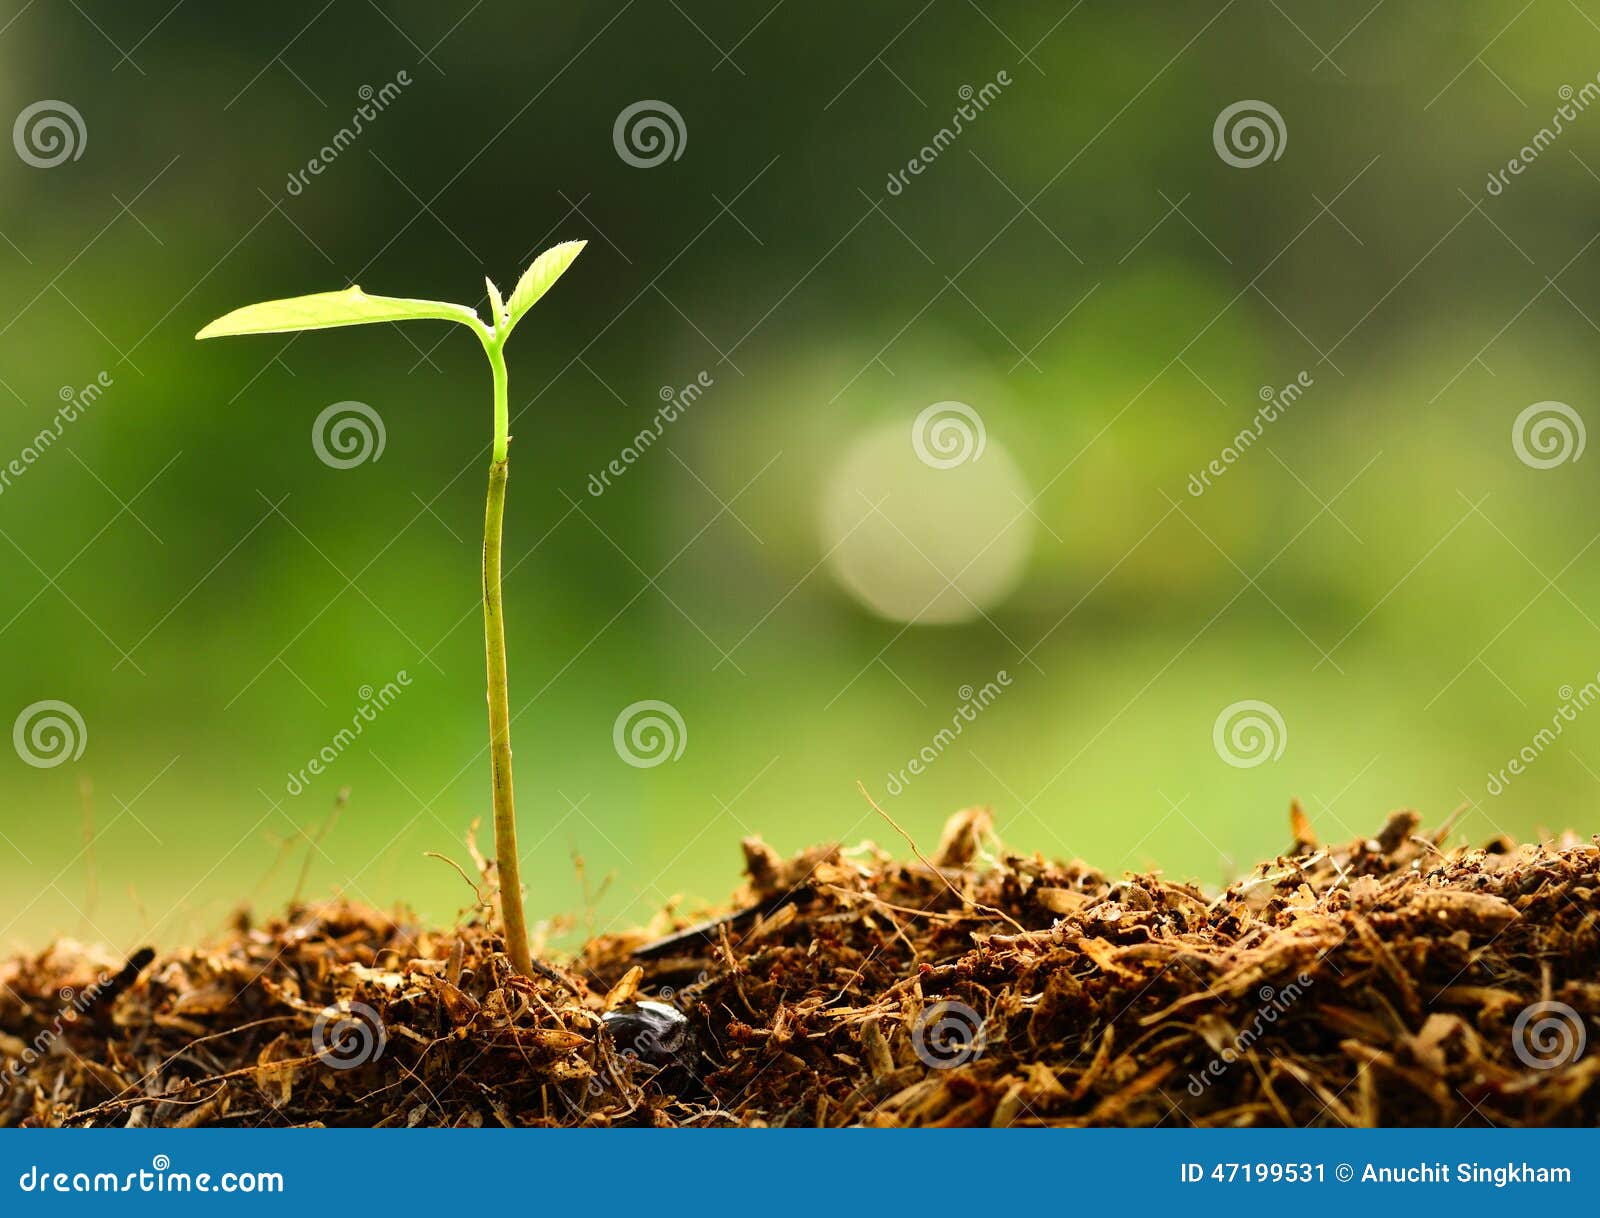 plant growing over green environment